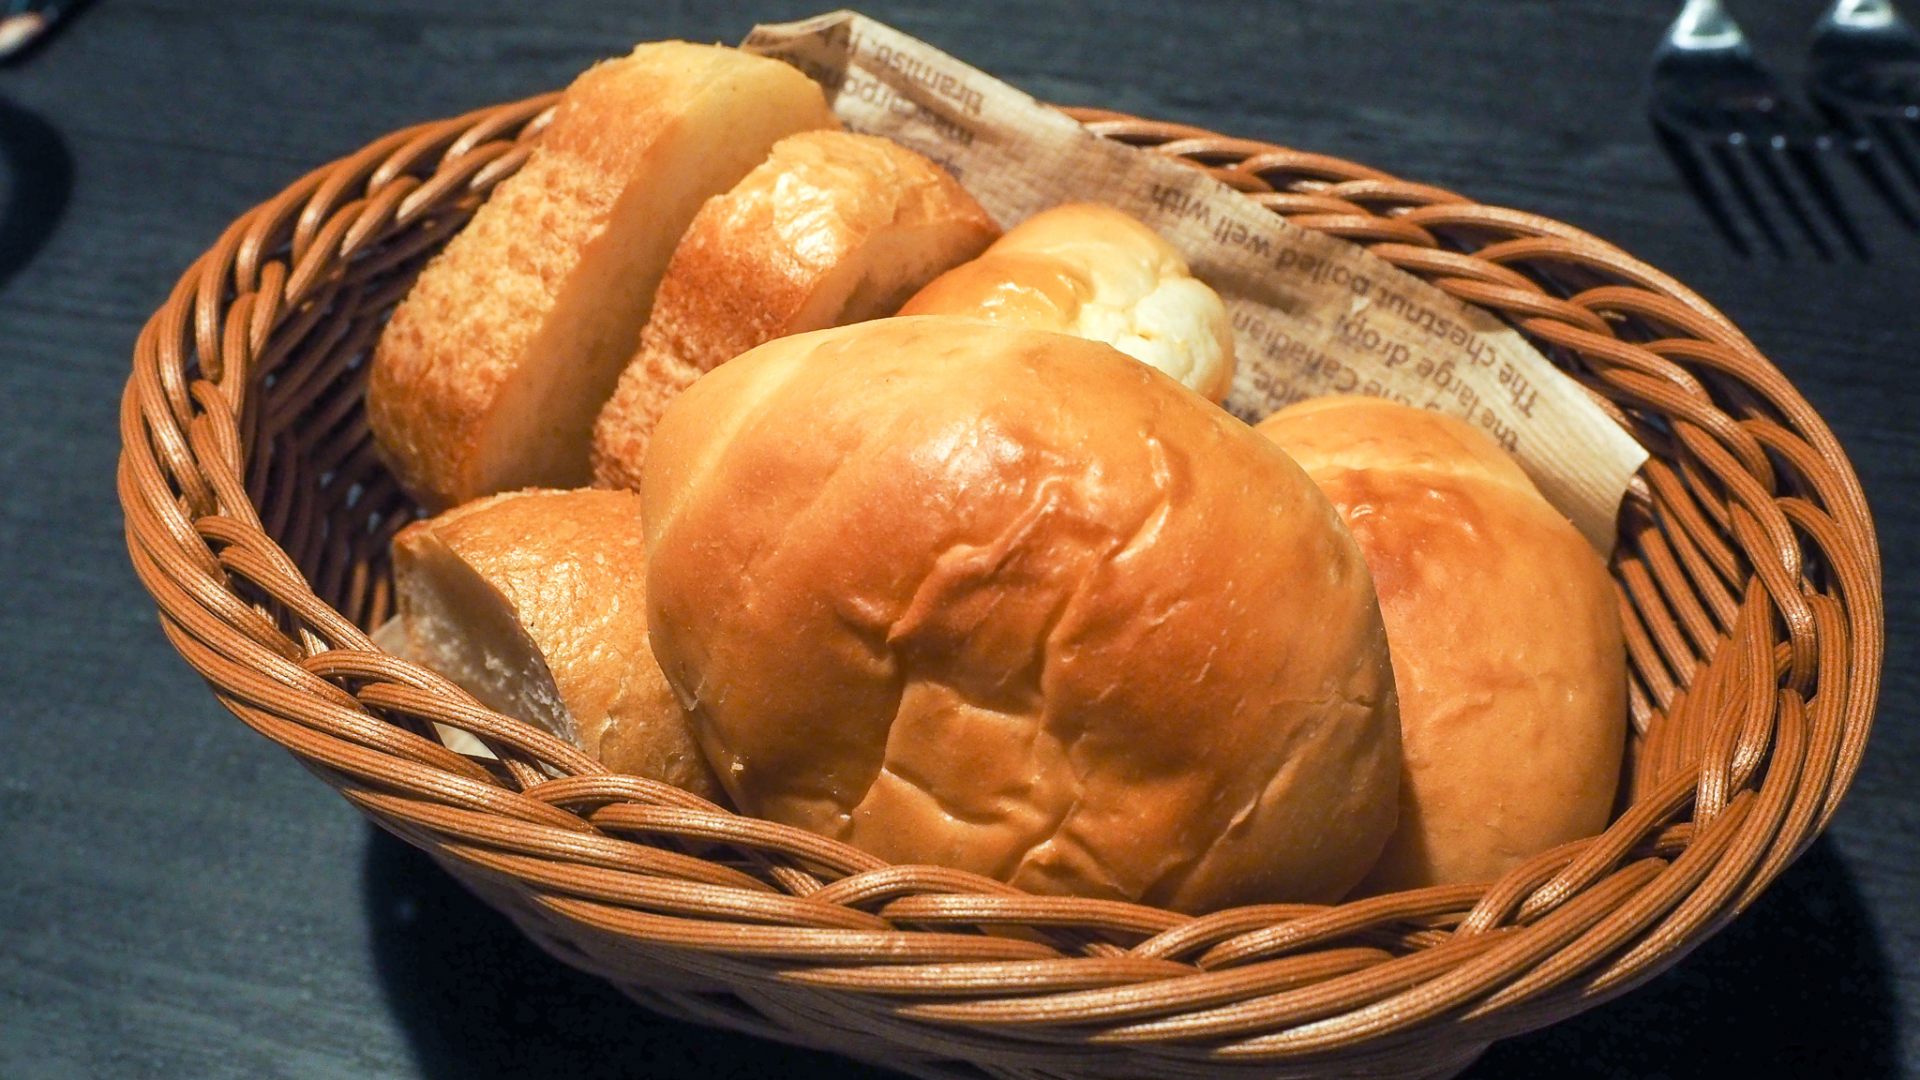 All-you-can-eat bread included in the set